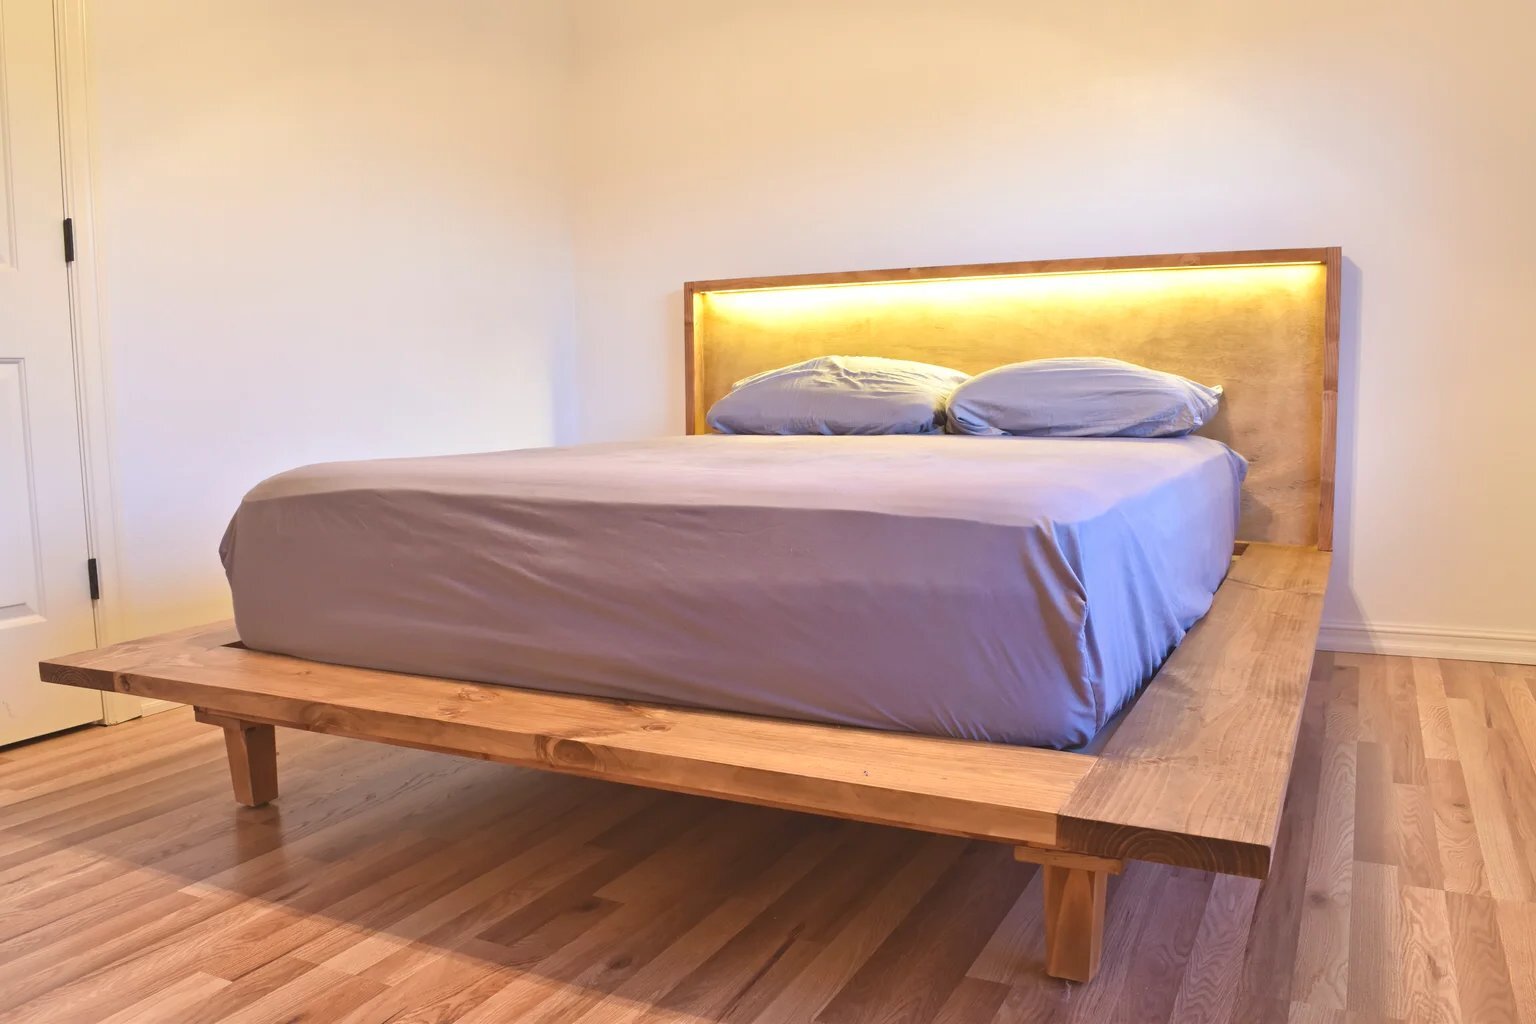 DIY Platform Bed: How To Build Your Own Stylish And Functional Bed